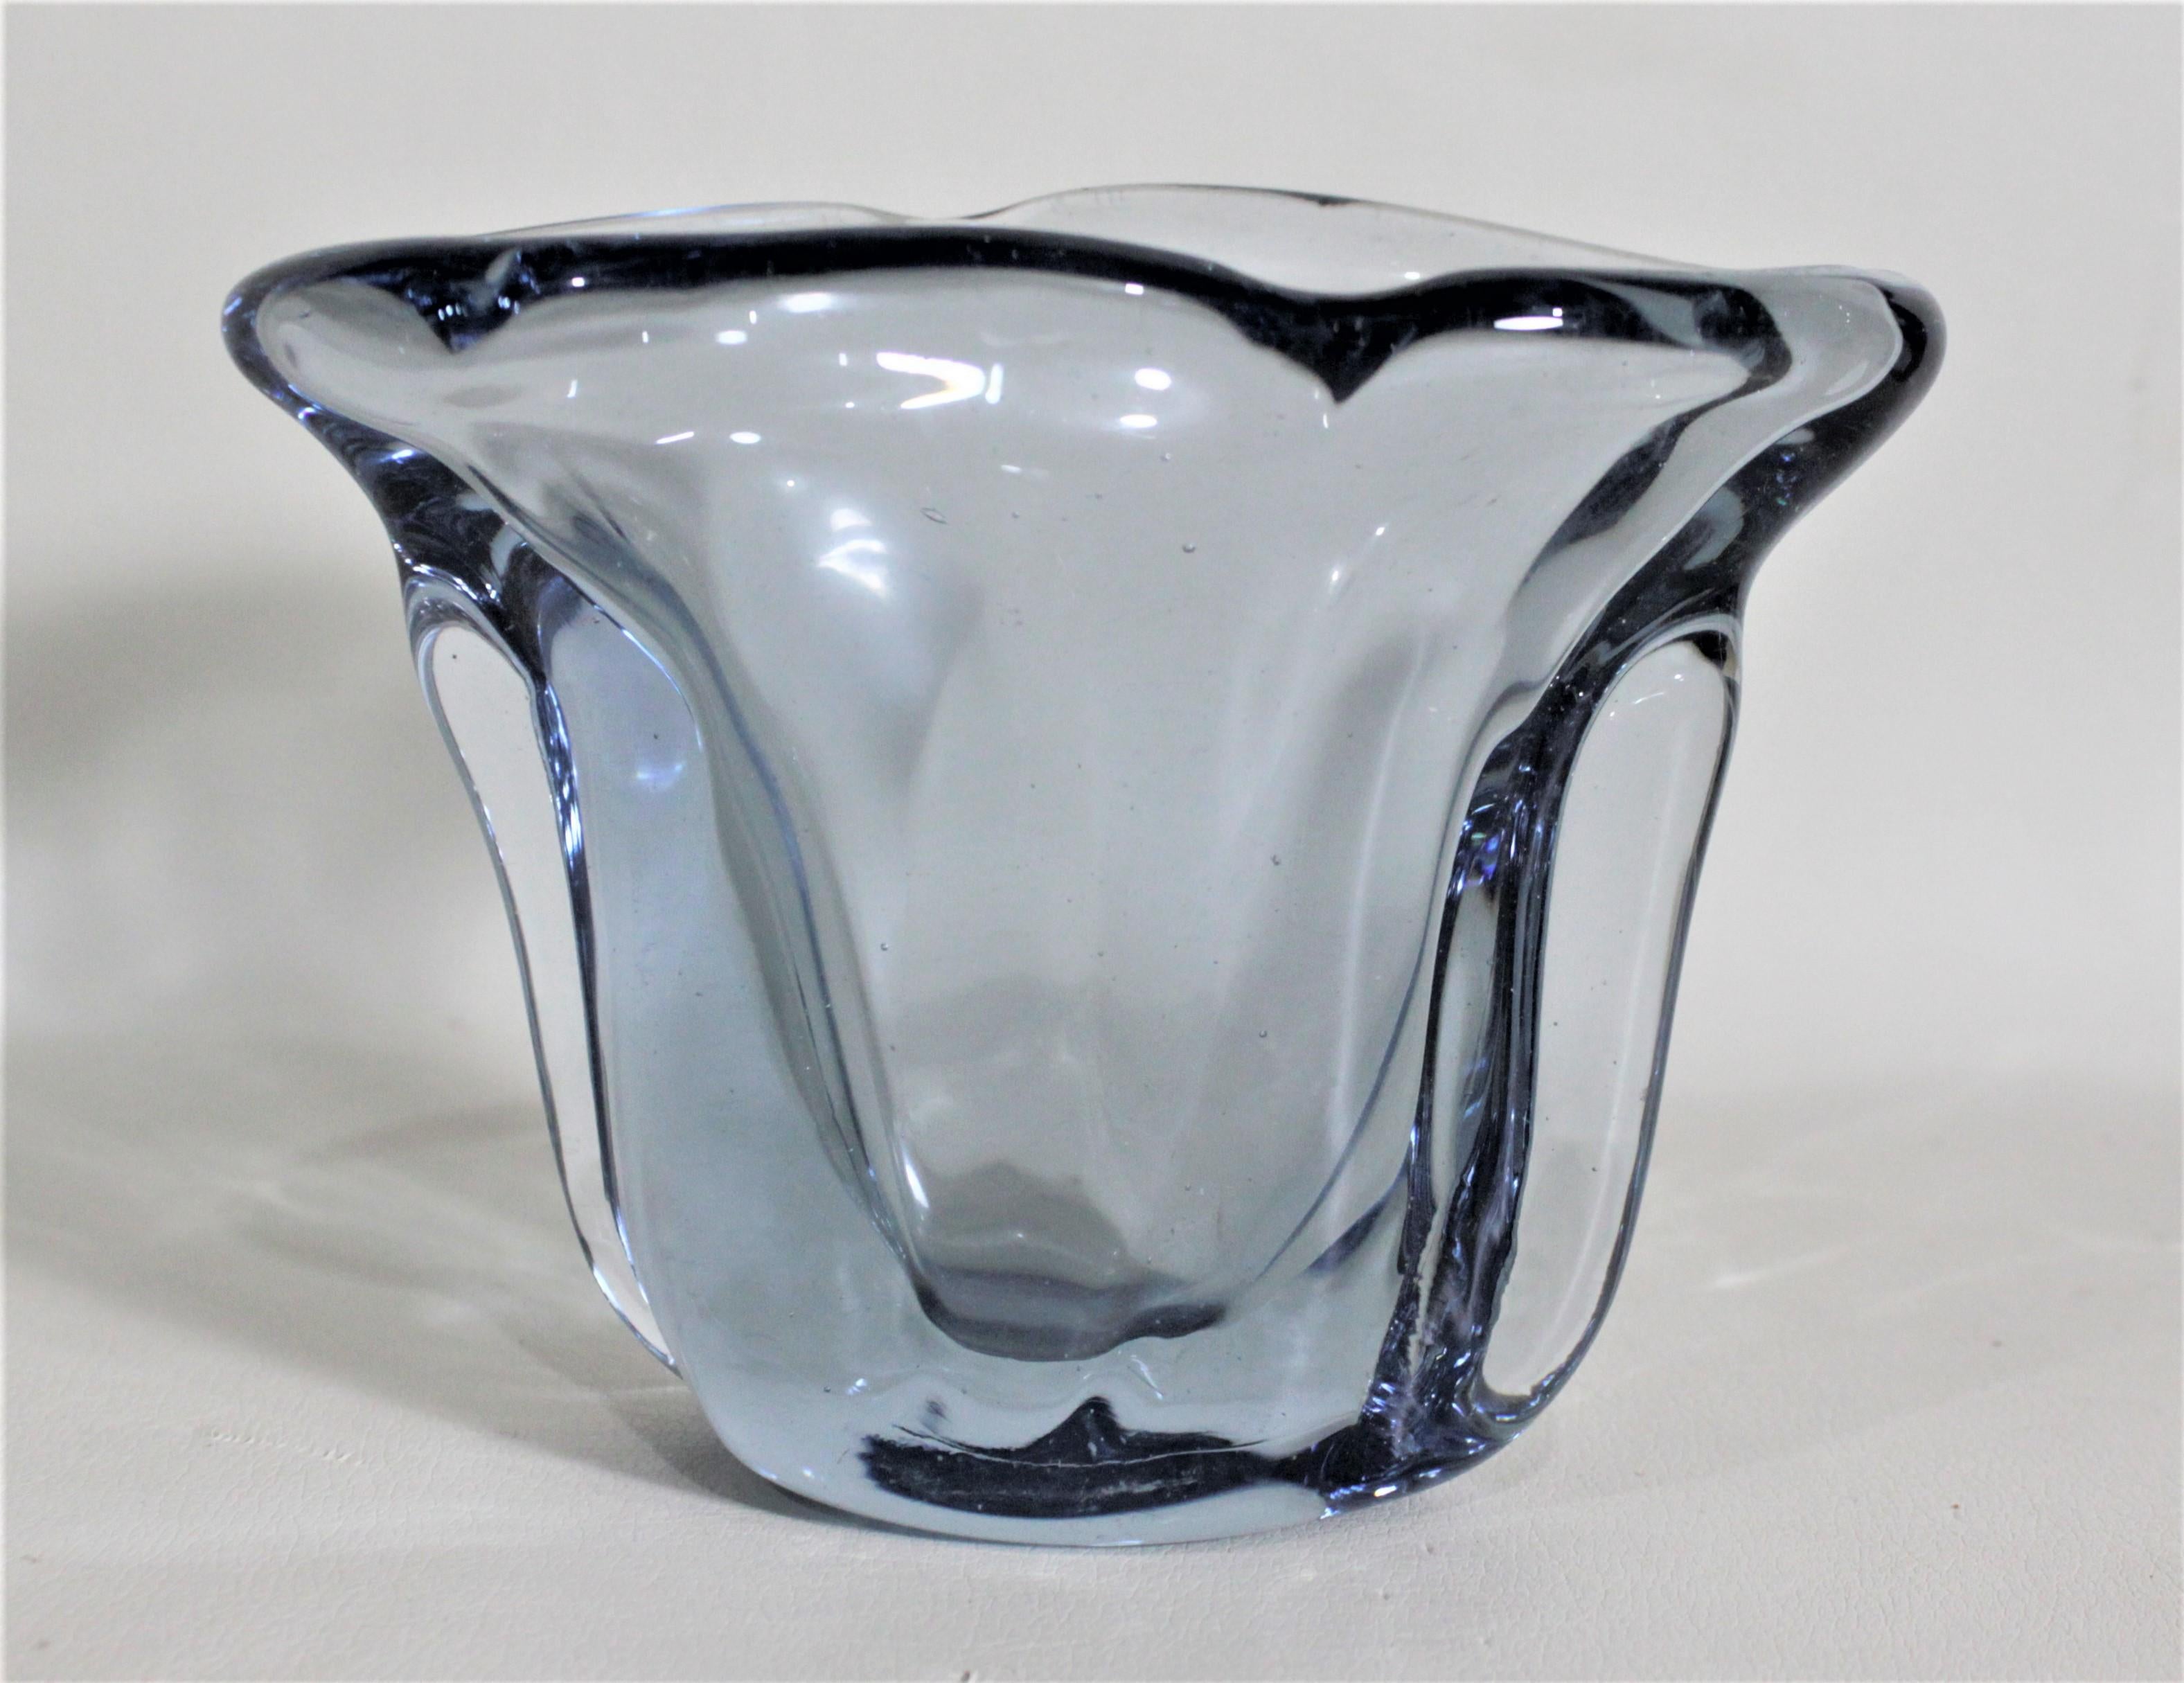 This clear ice blue art glass vase was made by the renowned Venini Murano art glass factory in circa 1970, in the Mid-Century Modern style. This vase is made of thick blue glass with a pulled fluted top with an off-center rim division that draws the